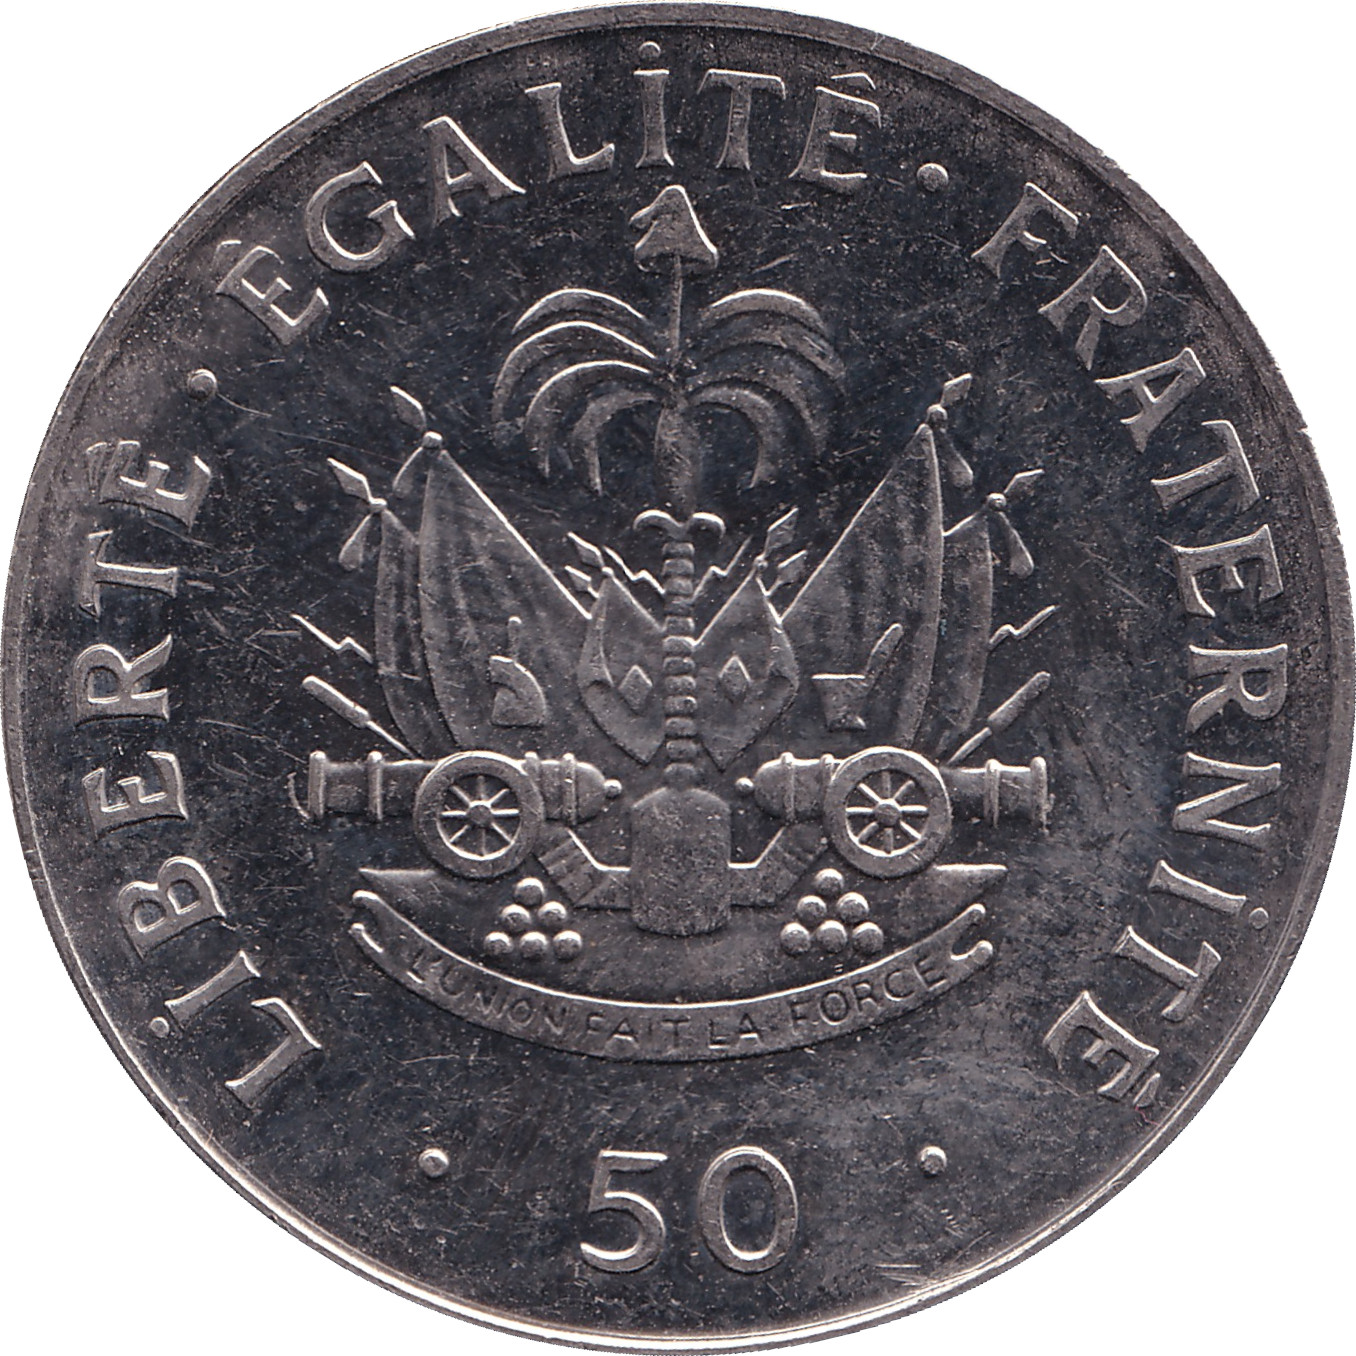 50 centimes - Charlemagne Peralte